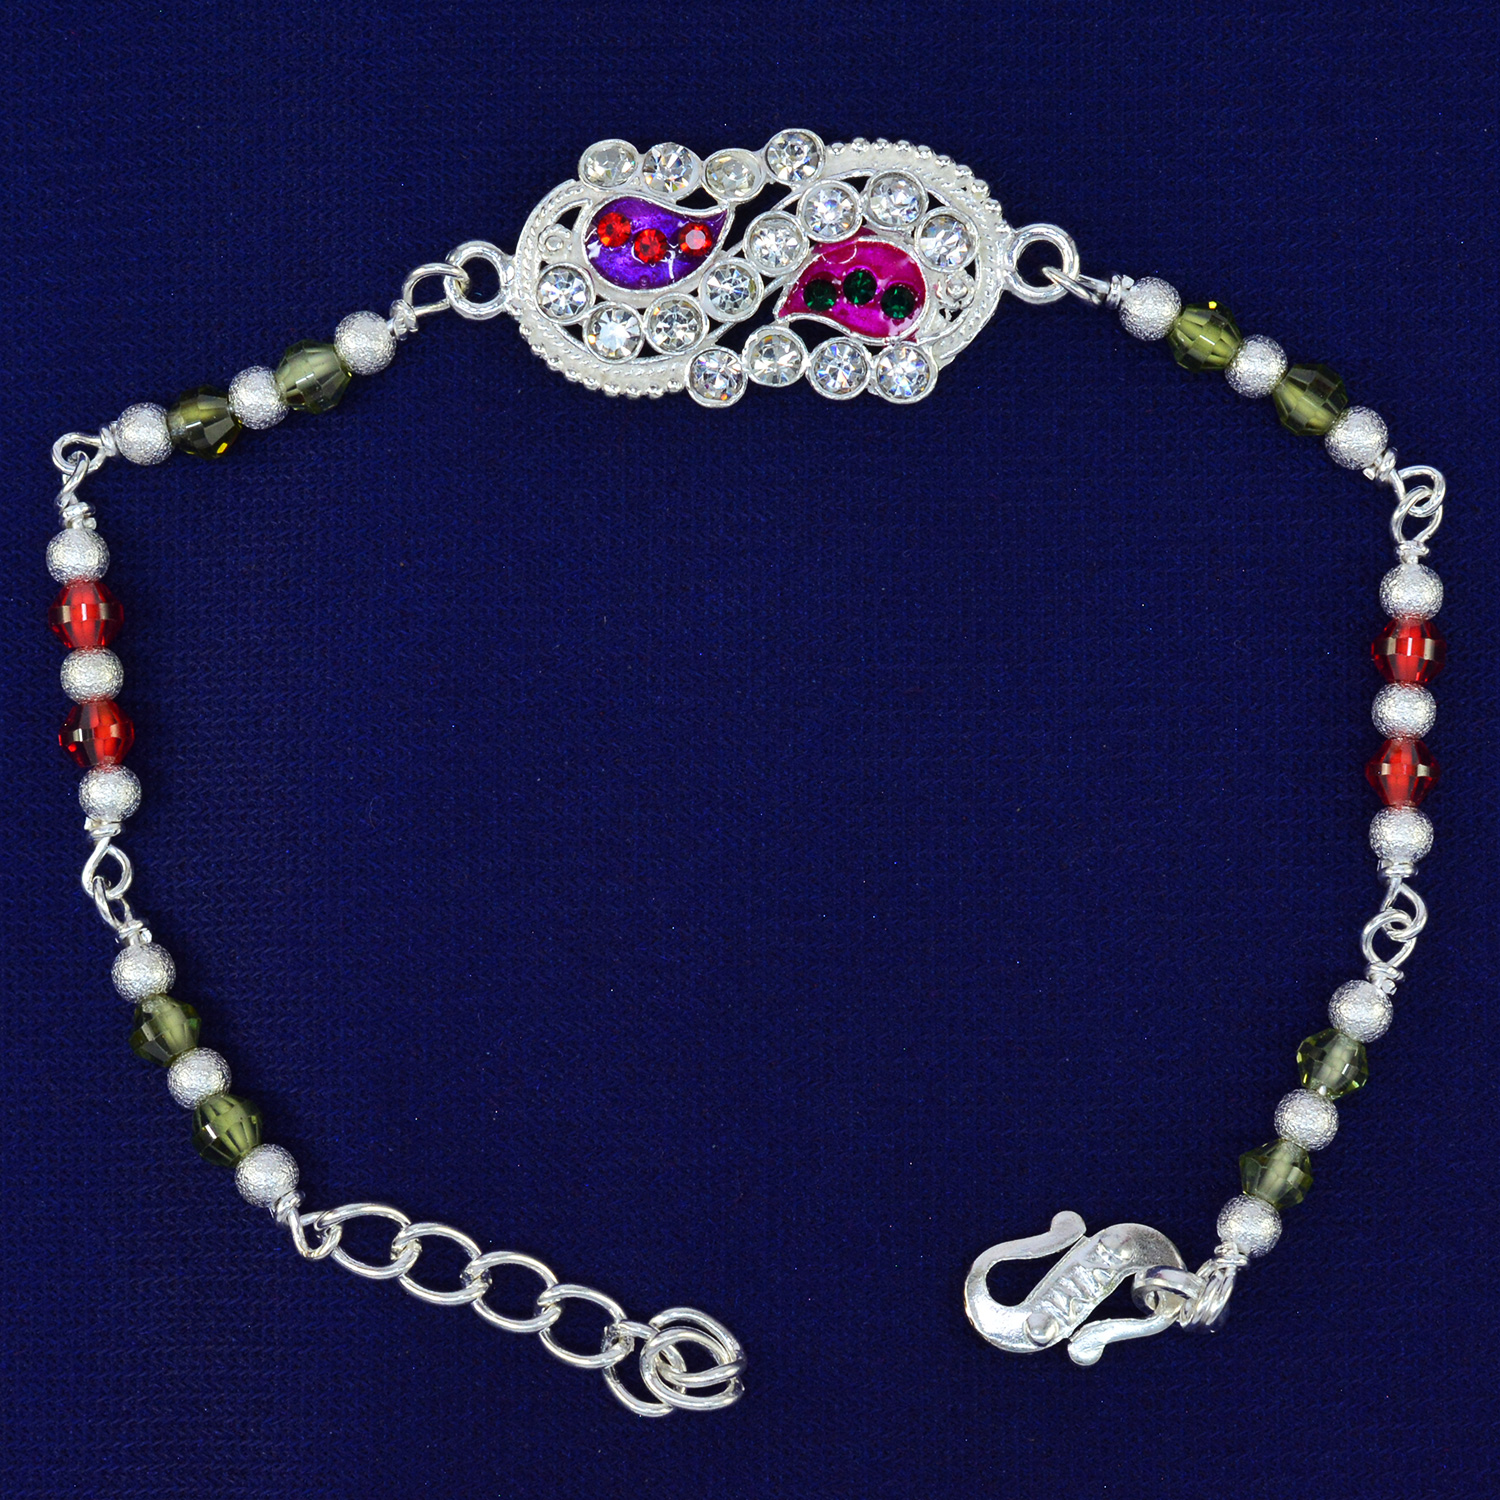 Diamond Studded and Beaded Mind Blowing Pure Silver Brother Rakhi - 9.3 Grams